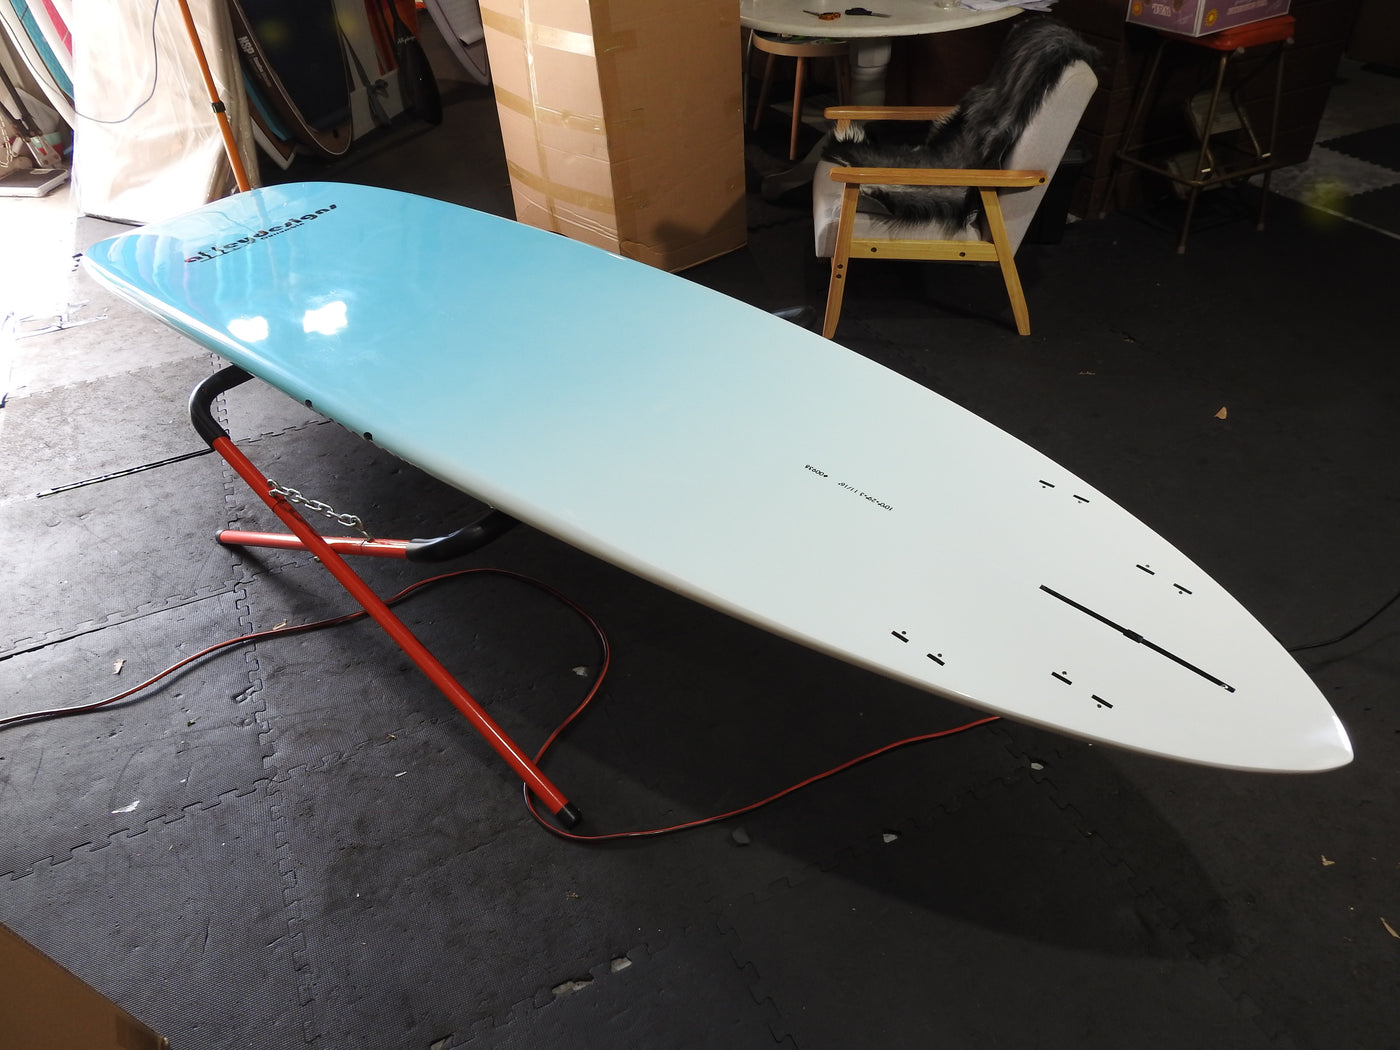 10' x 29" Bamboo & Teal Turtle Pin Tail Alleydesigns SURF SUP - Alleydesigns  Pty Ltd                                             ABN: 44165571264